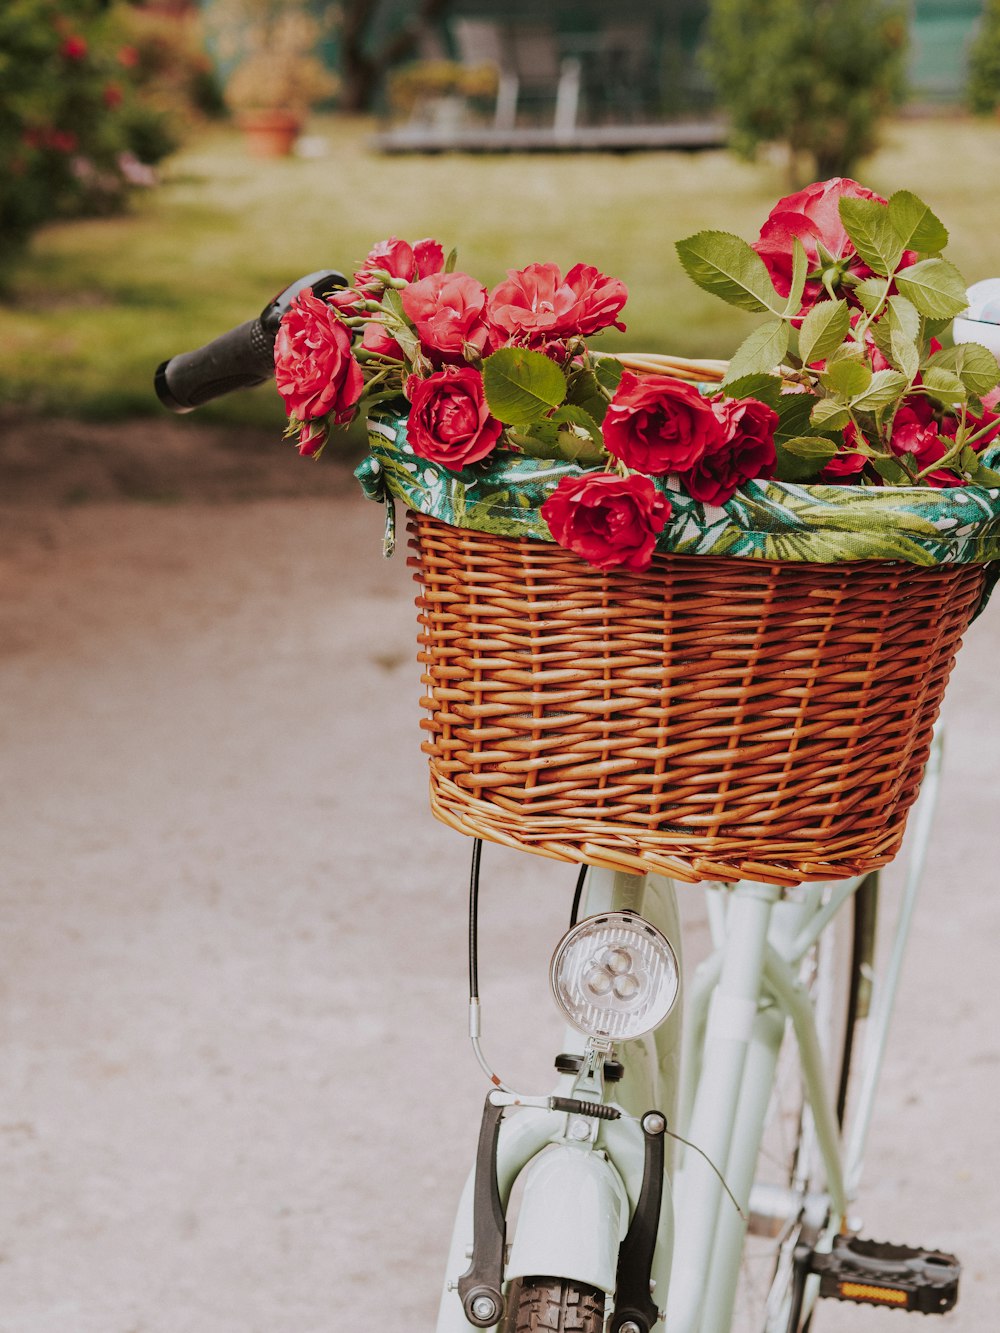 a basket of flowers on a bicycle